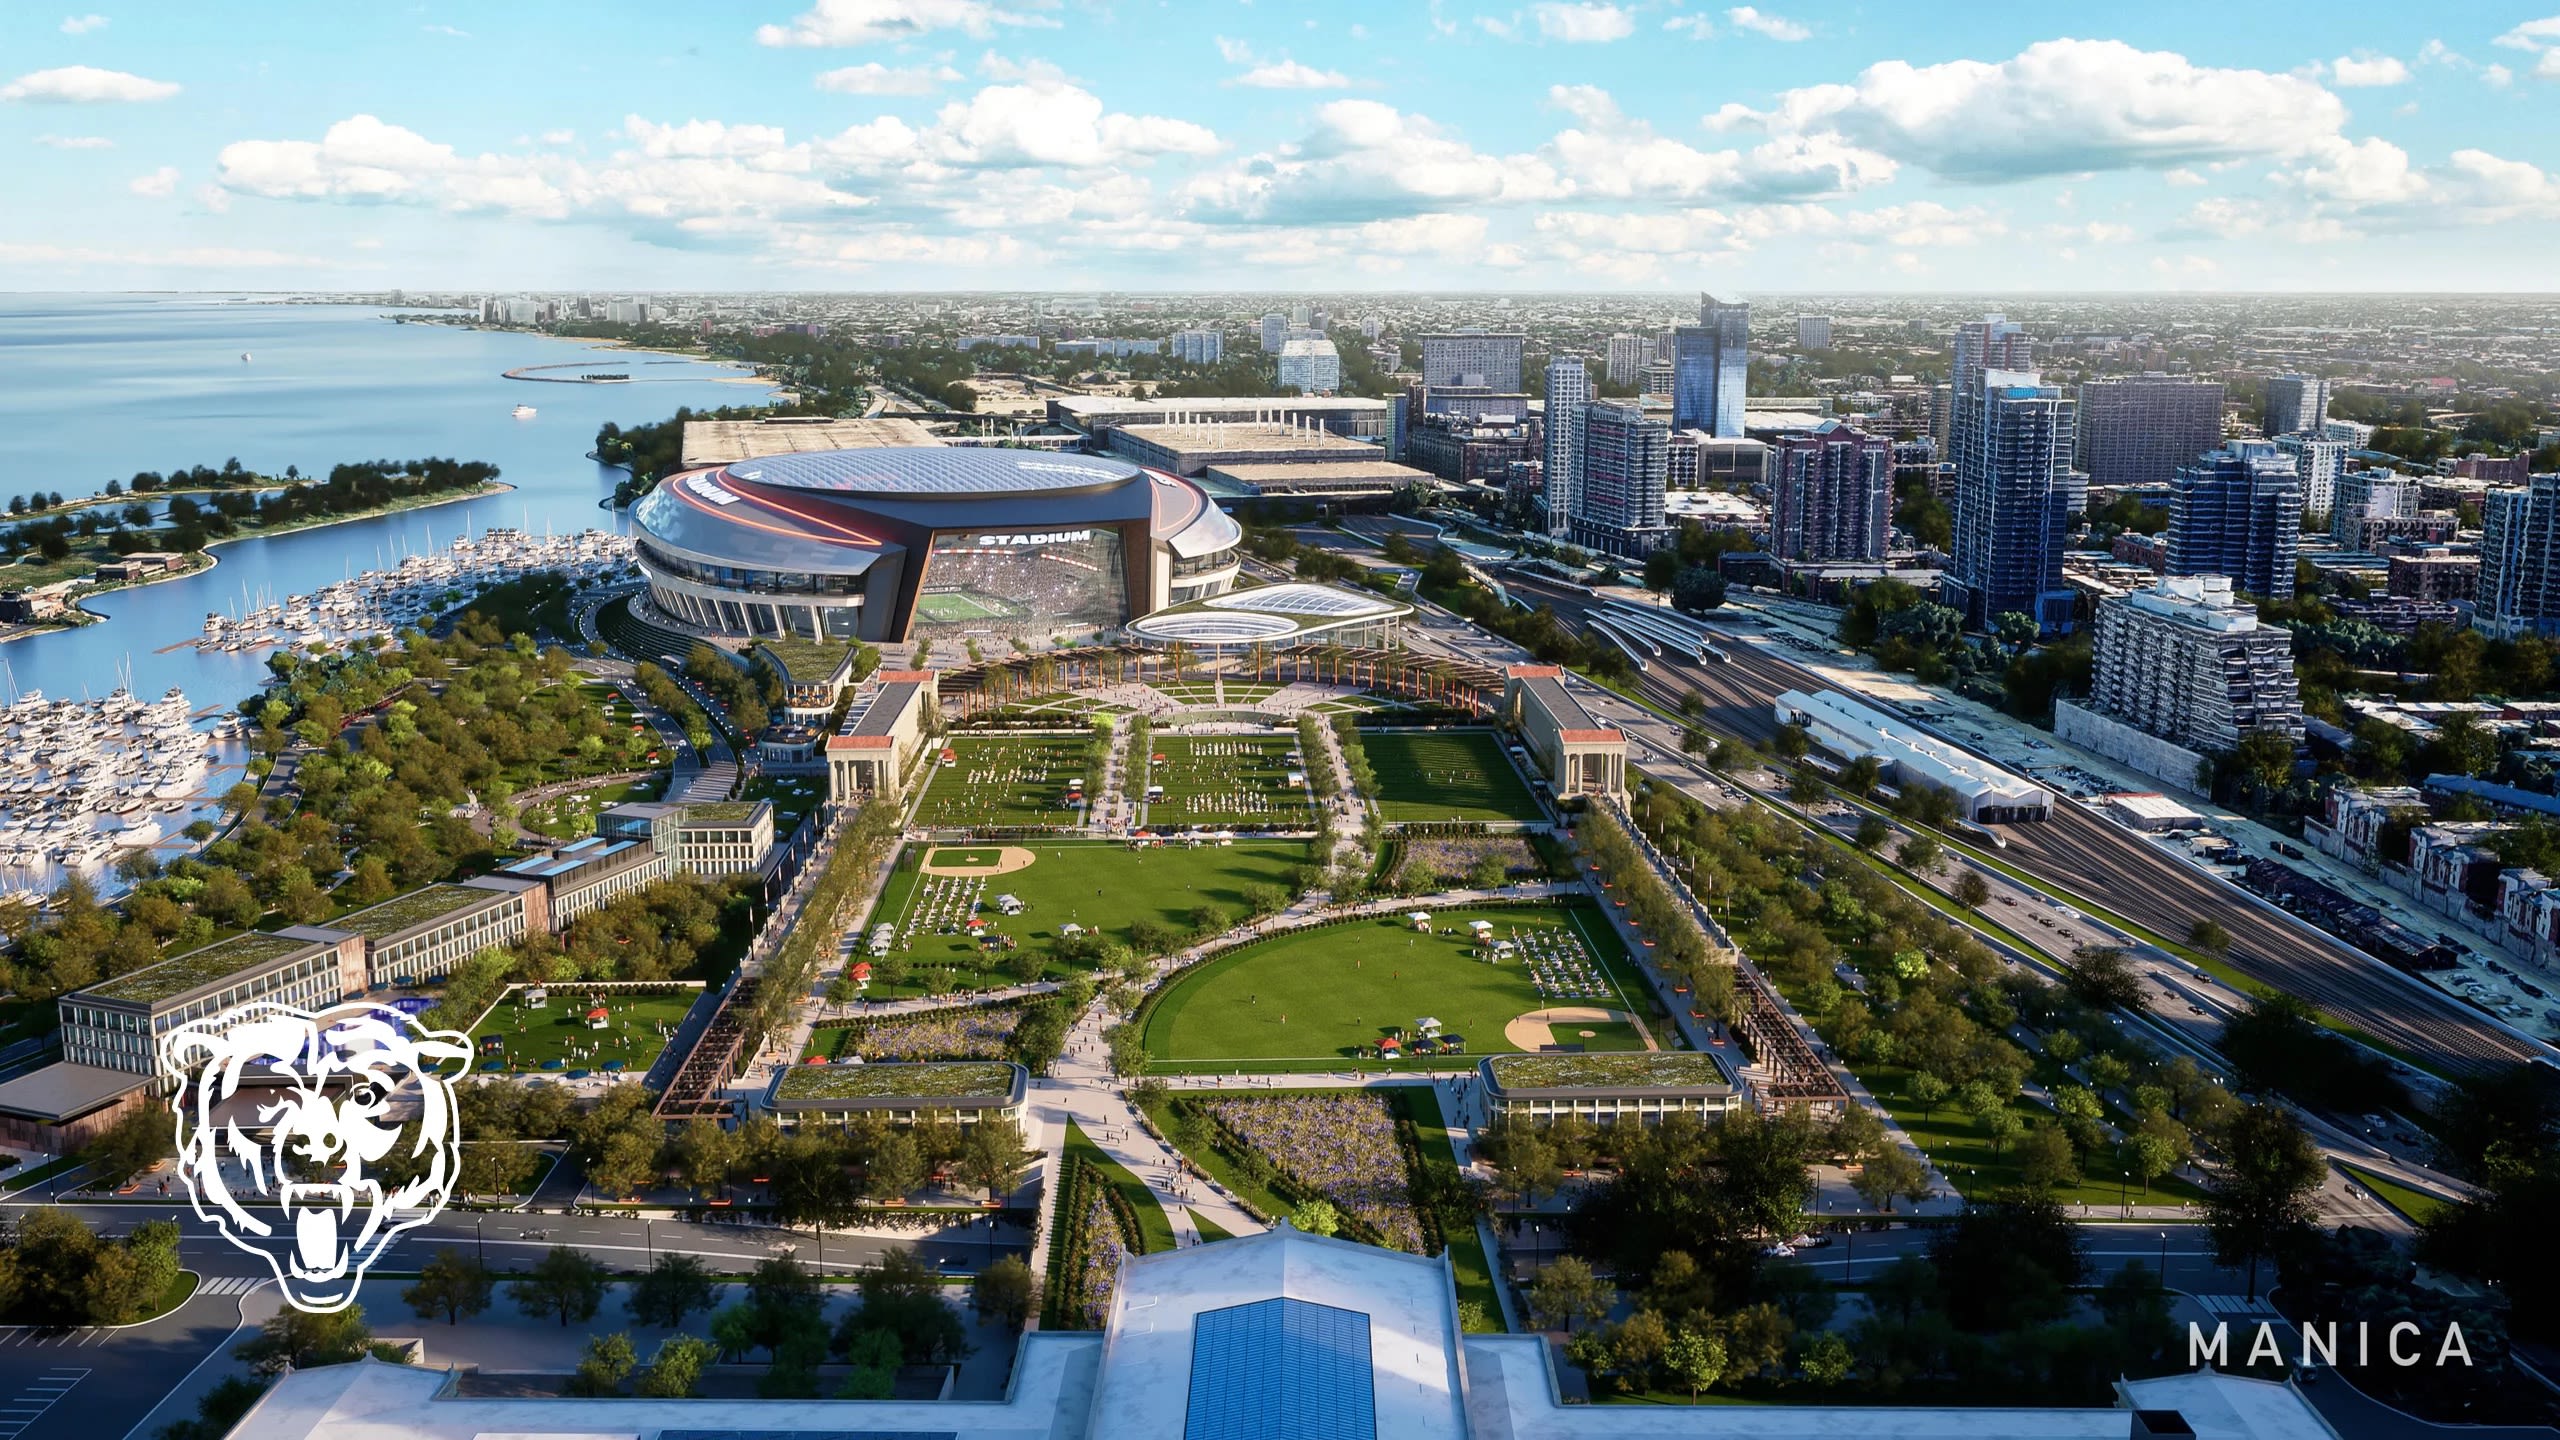 Friends of the Parks 'prepared to fight for the lakefront' in battle for new Bears domed stadium